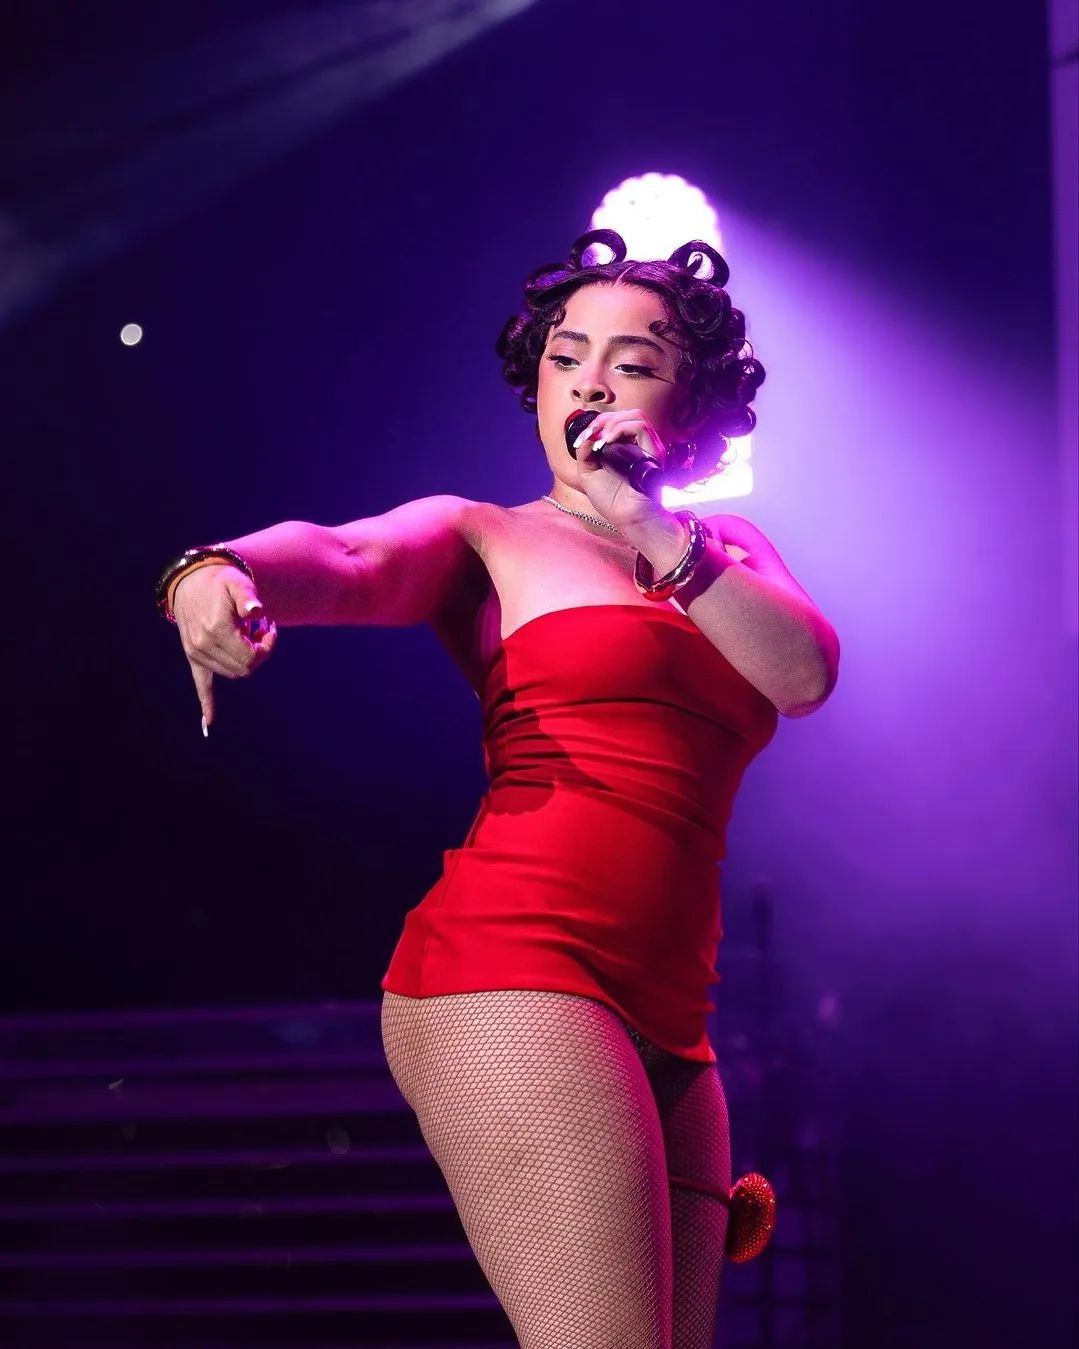 Ice Spice Dresses As Betty Boop For Halloween Performance 03